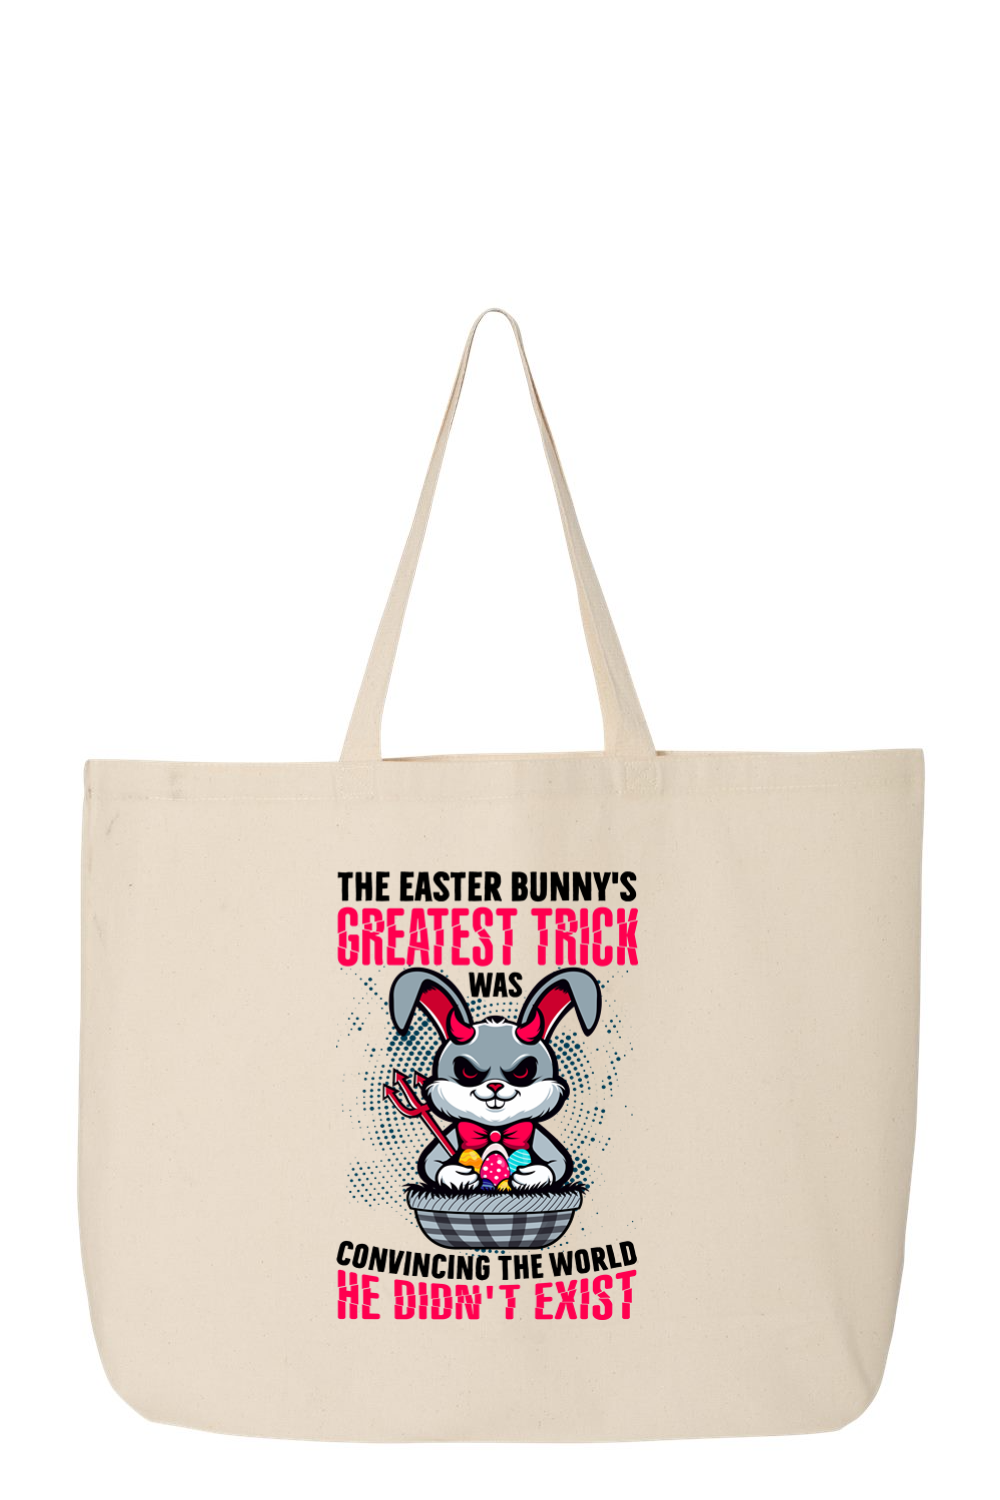 The Easter Bunny's Greatest Trick Basket Jumbo Tote